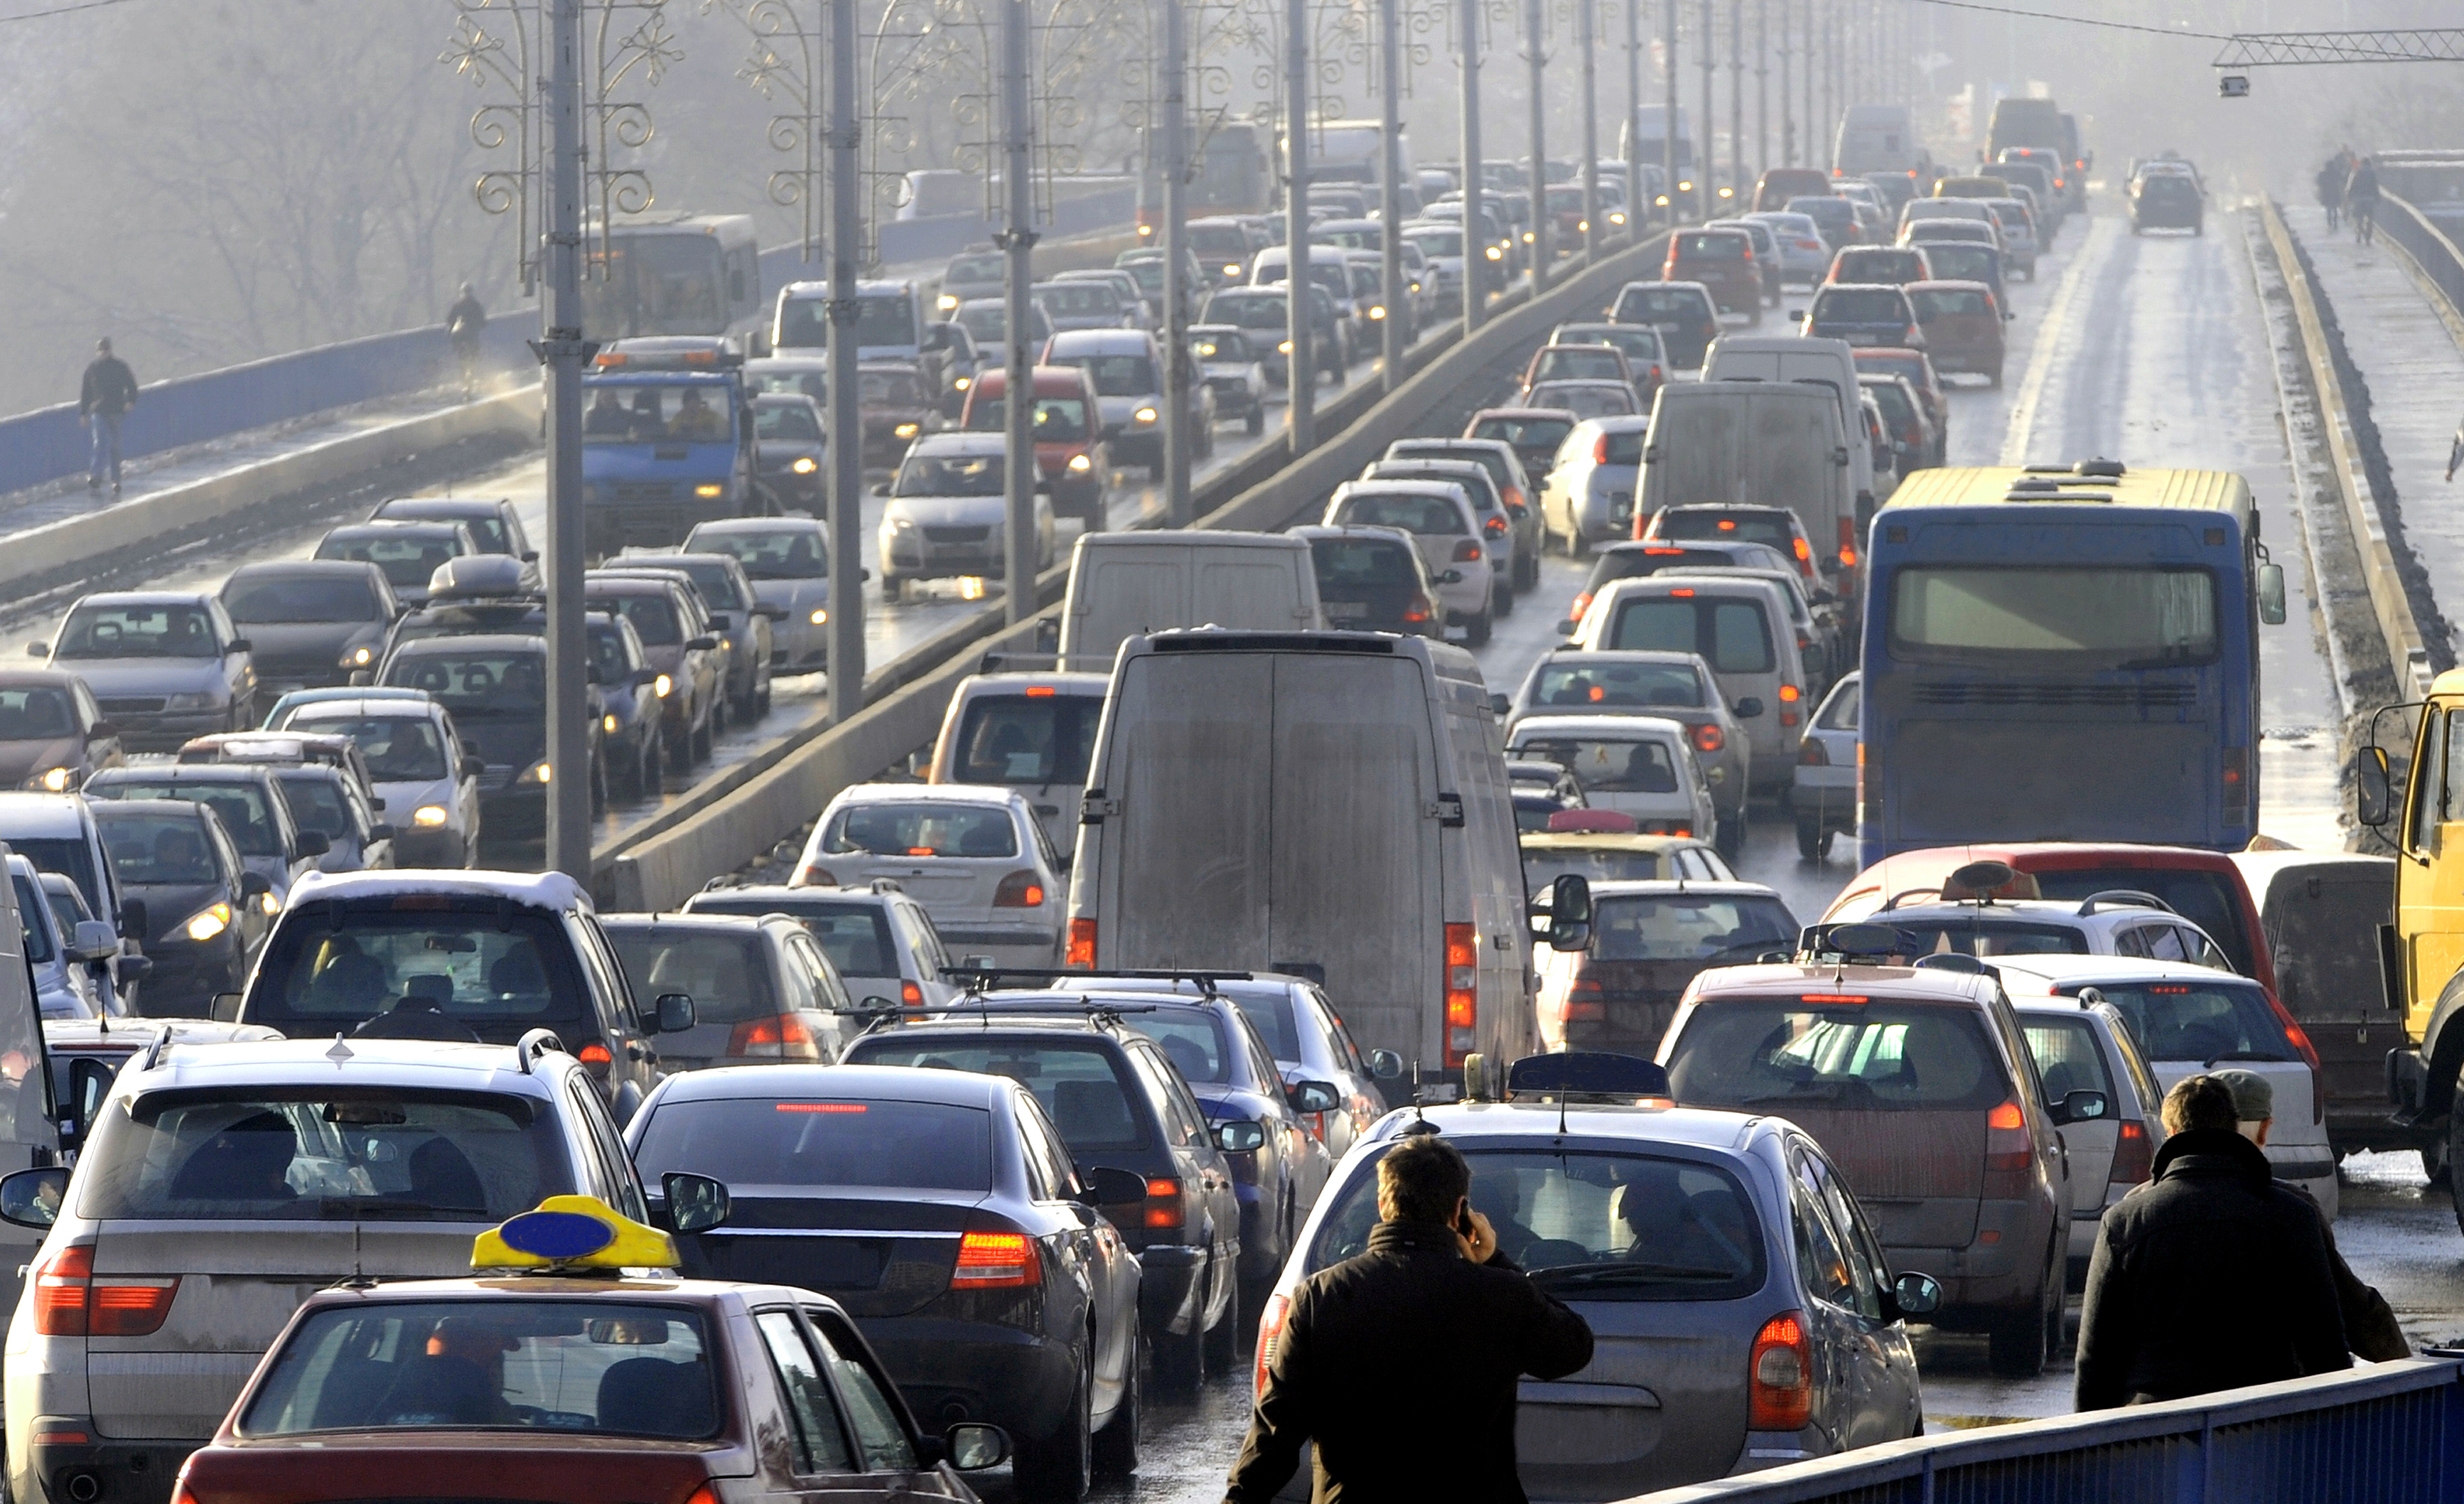 Pollution from cars and vans costs £6billion per year in health damages